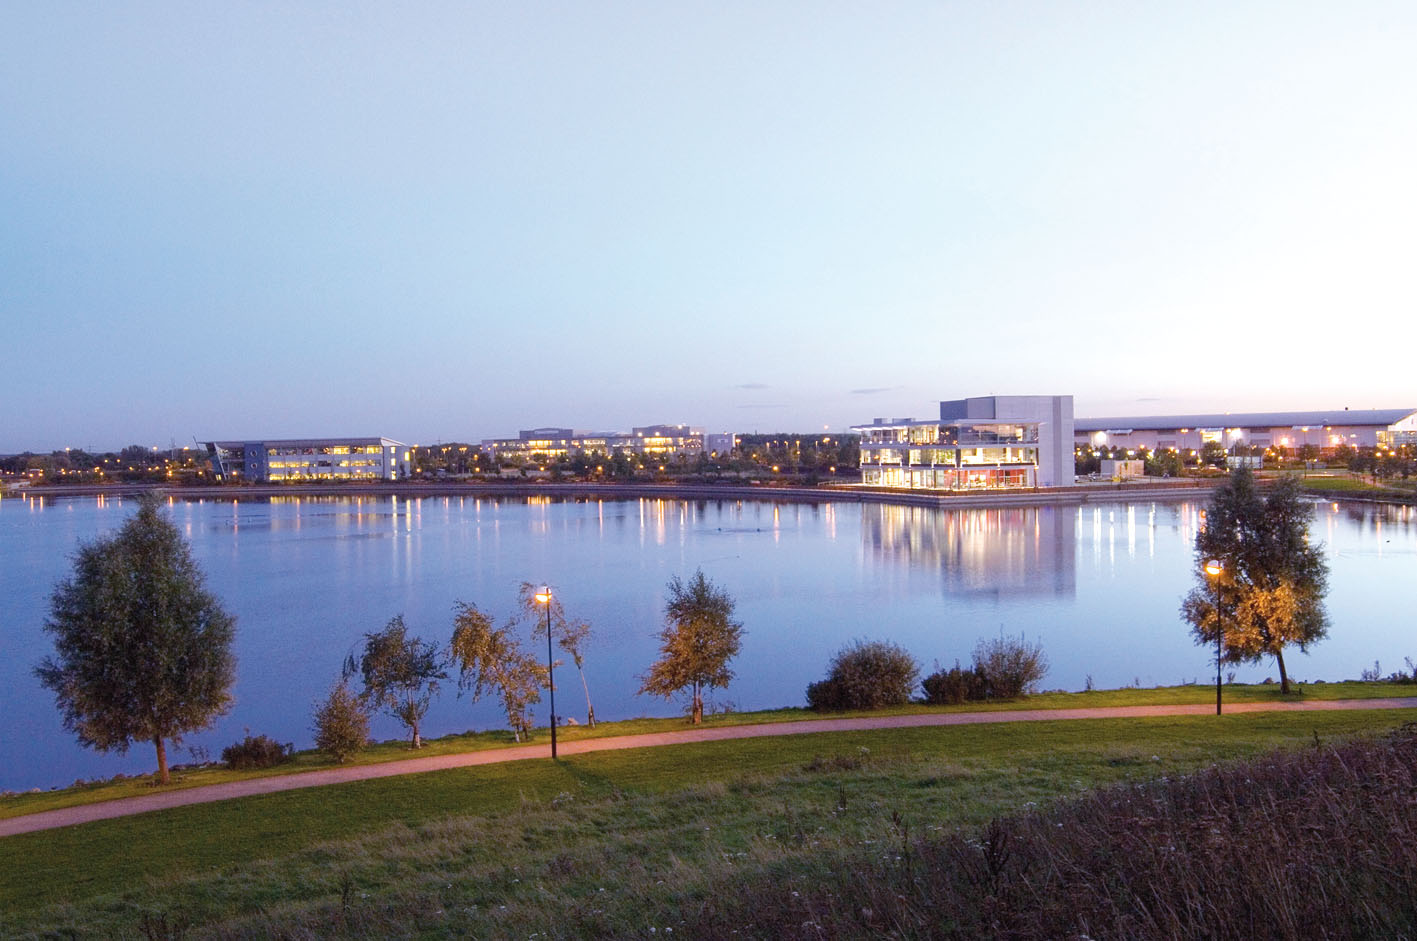 A lakeside in Doncaster at evening time